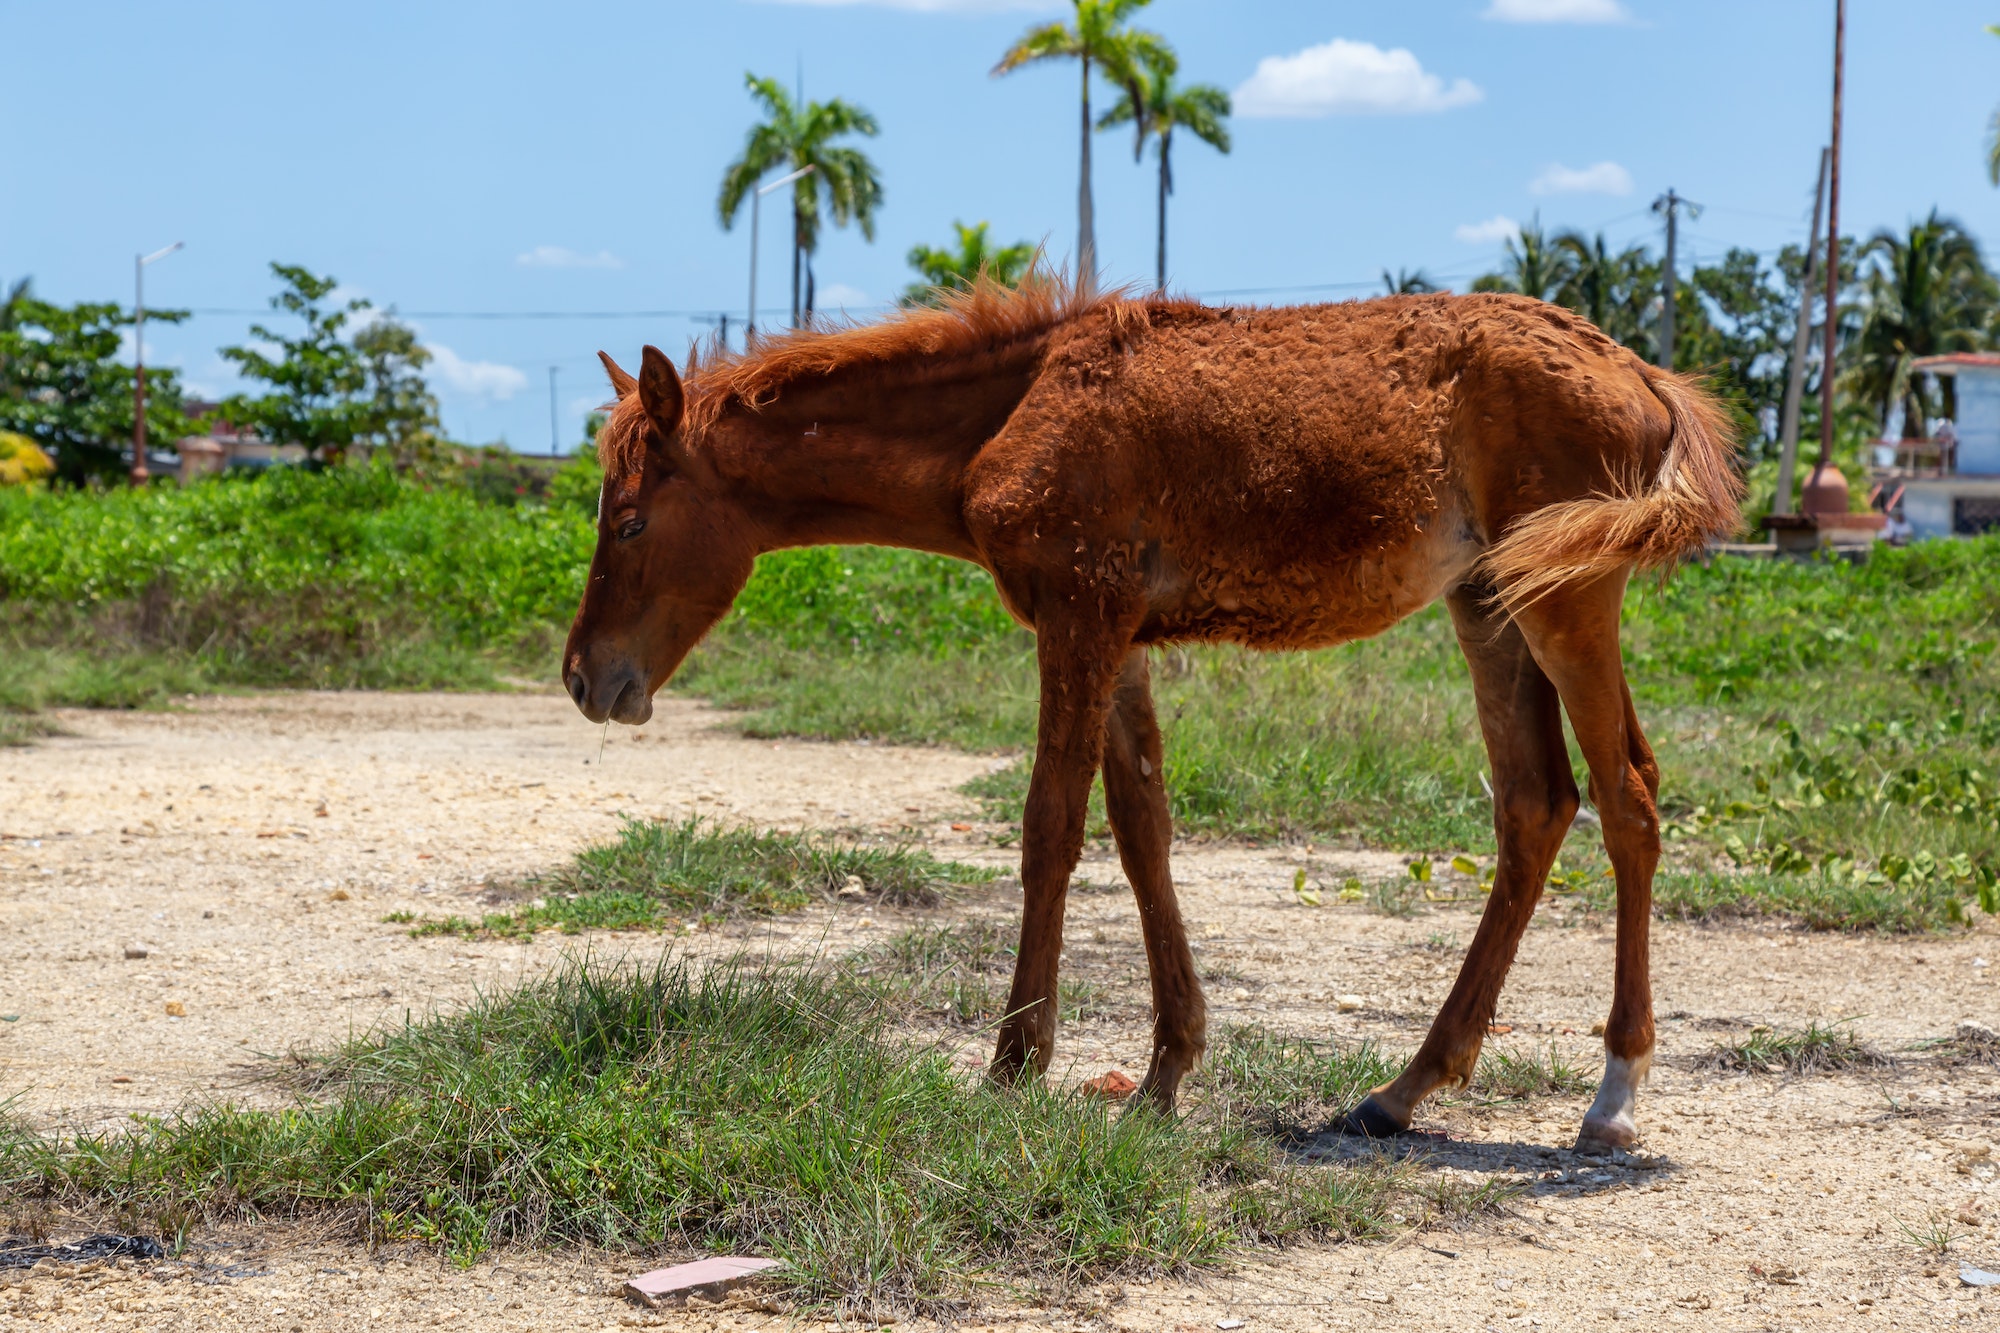 Small and Skinny young wild Horse in Cuba